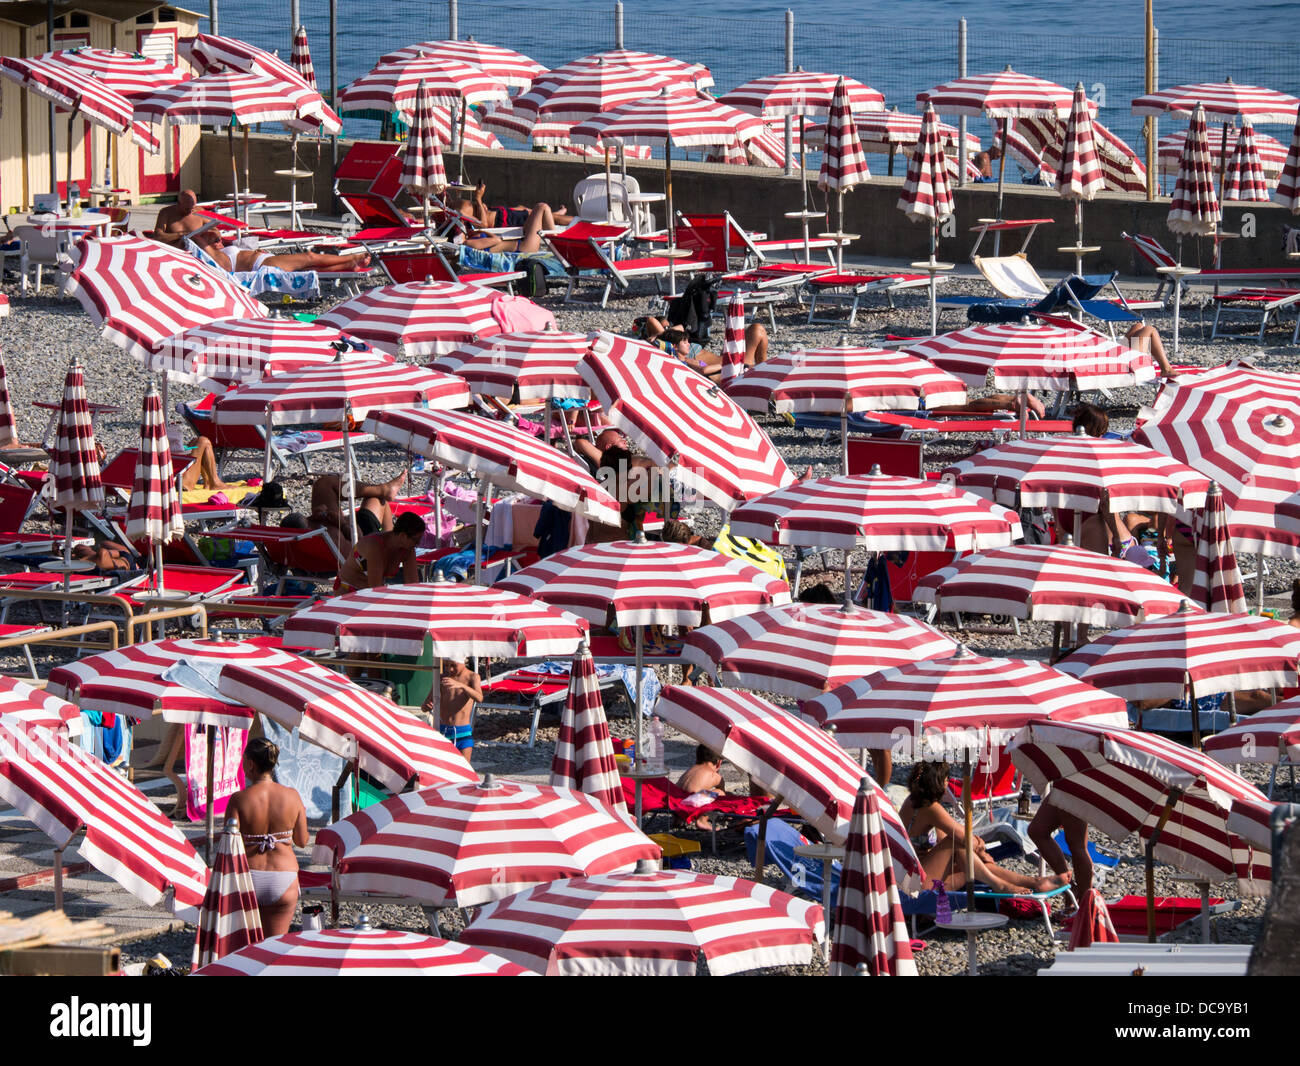 Sunbathers under Red and White Parasols in Genoa, Liguria, Italy Stock Photo